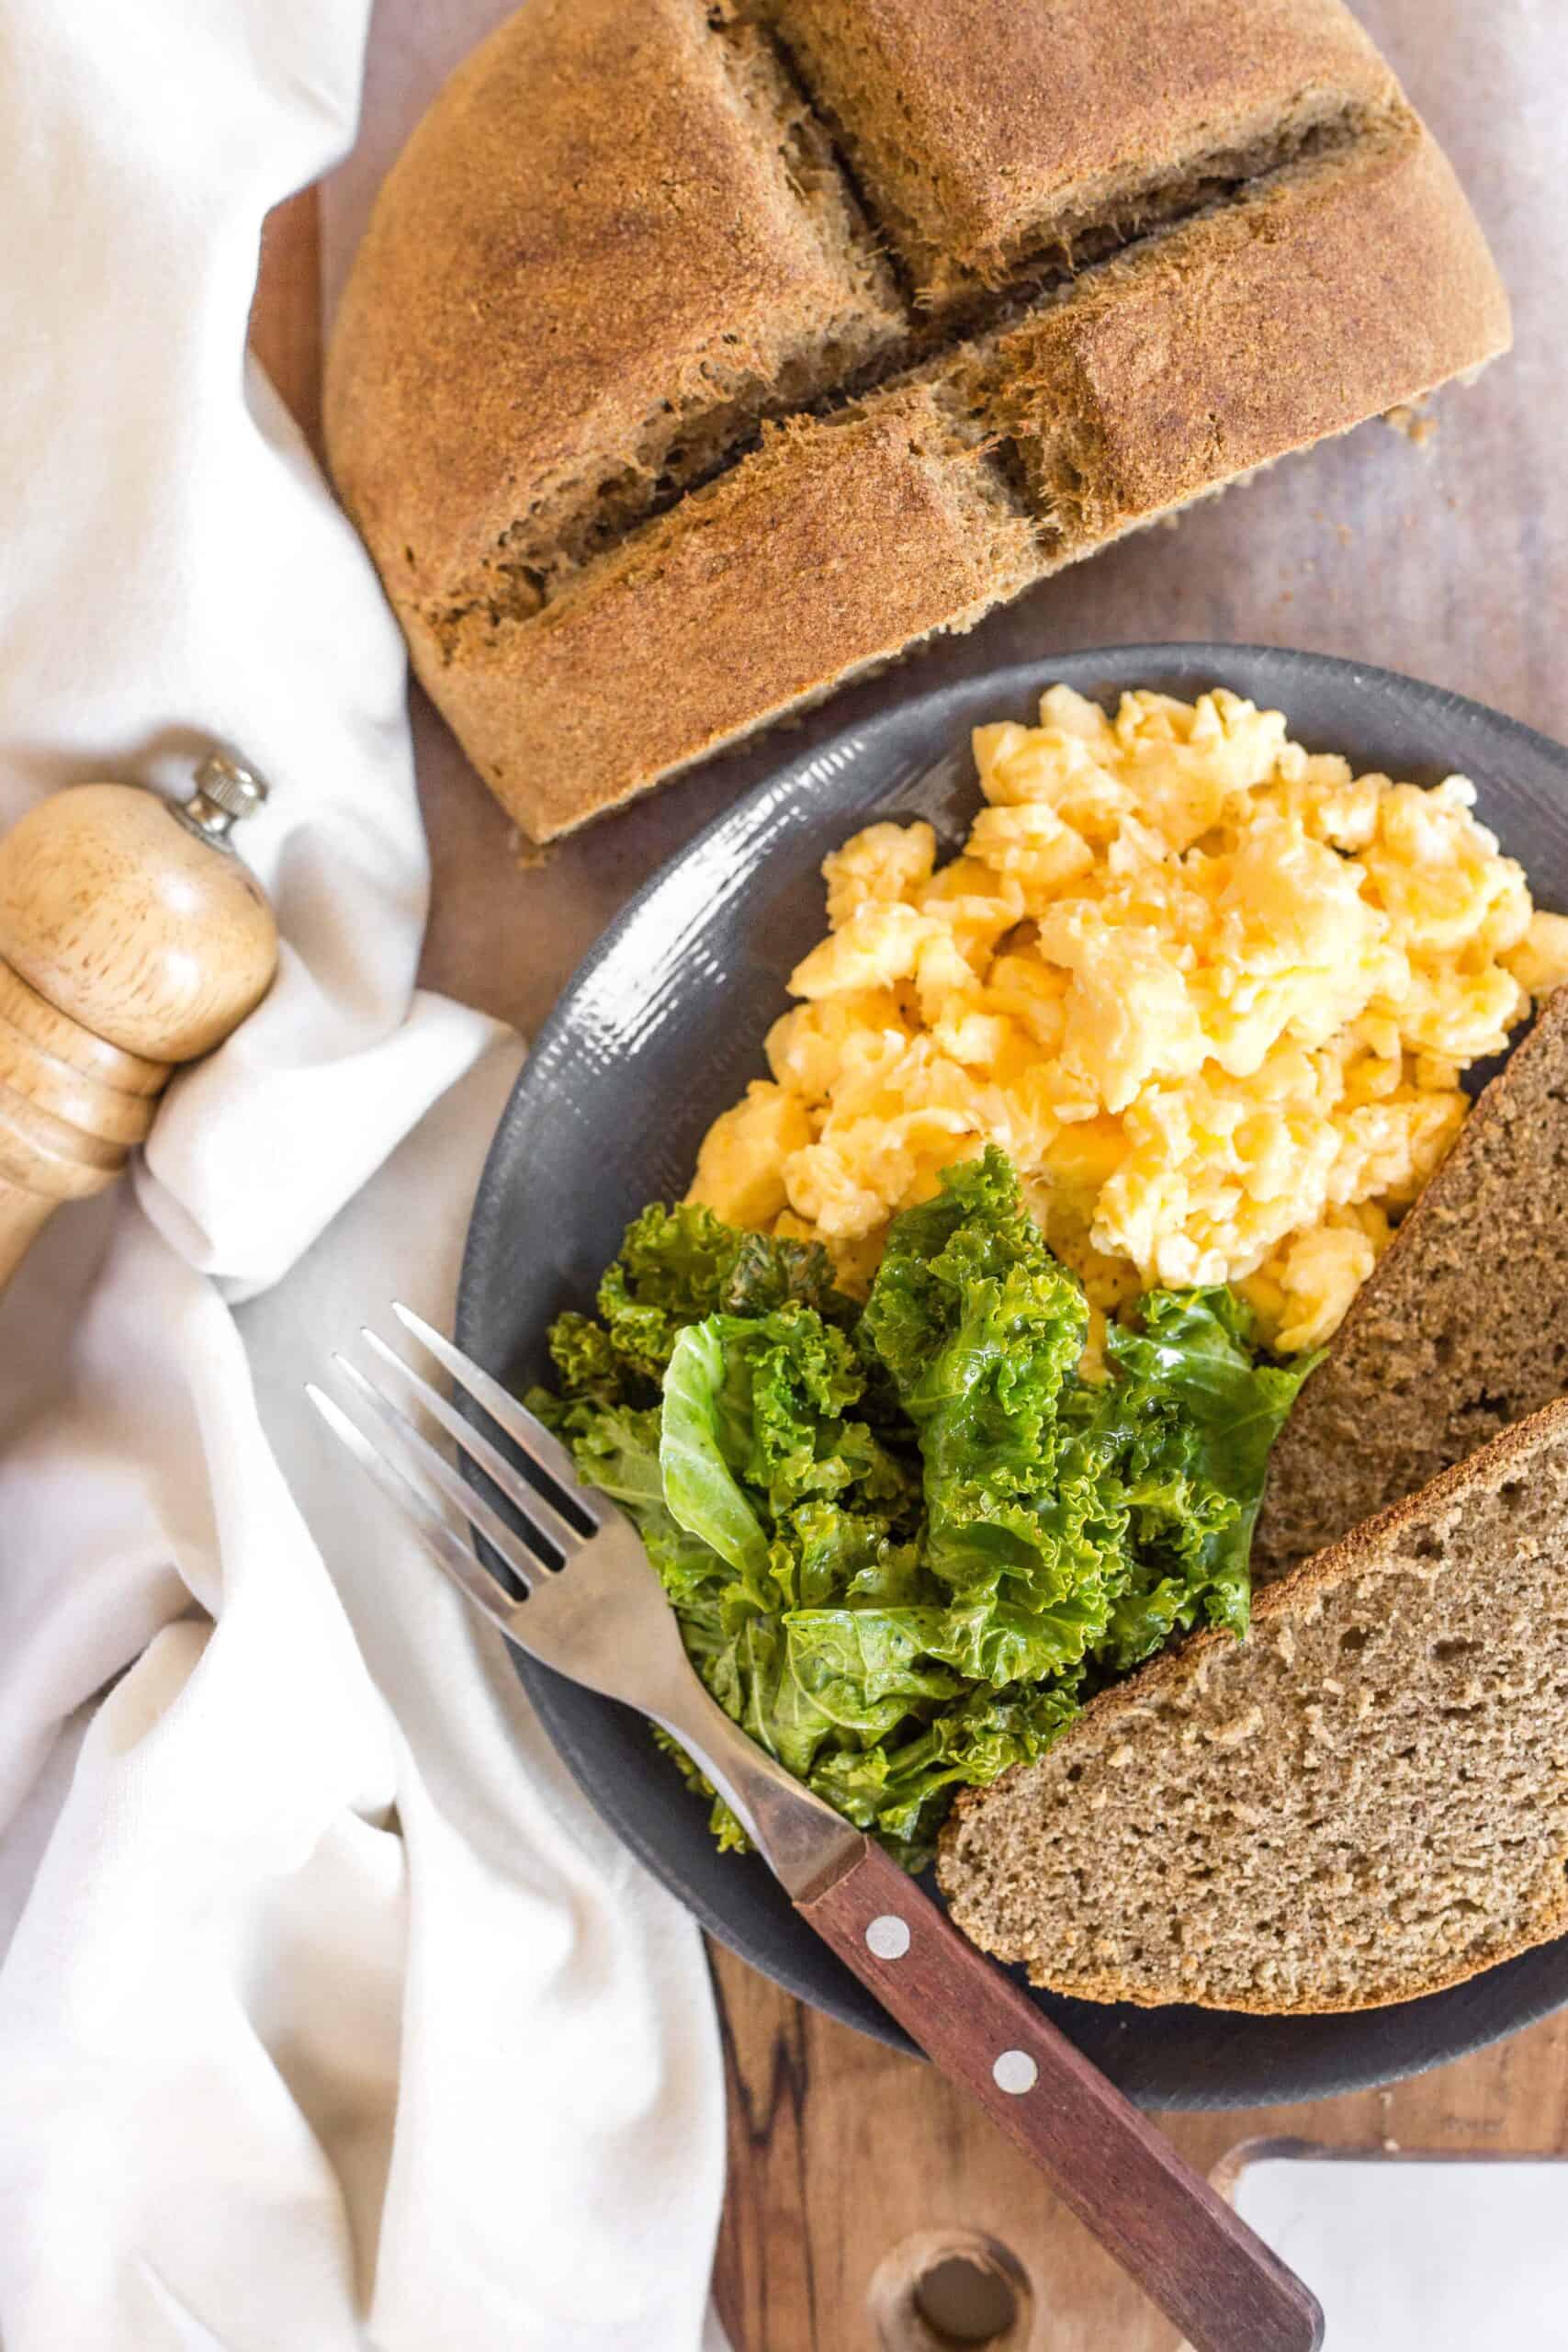 A plate of sautéed kale, scrambled eggs and two slices of Irish brown bread.